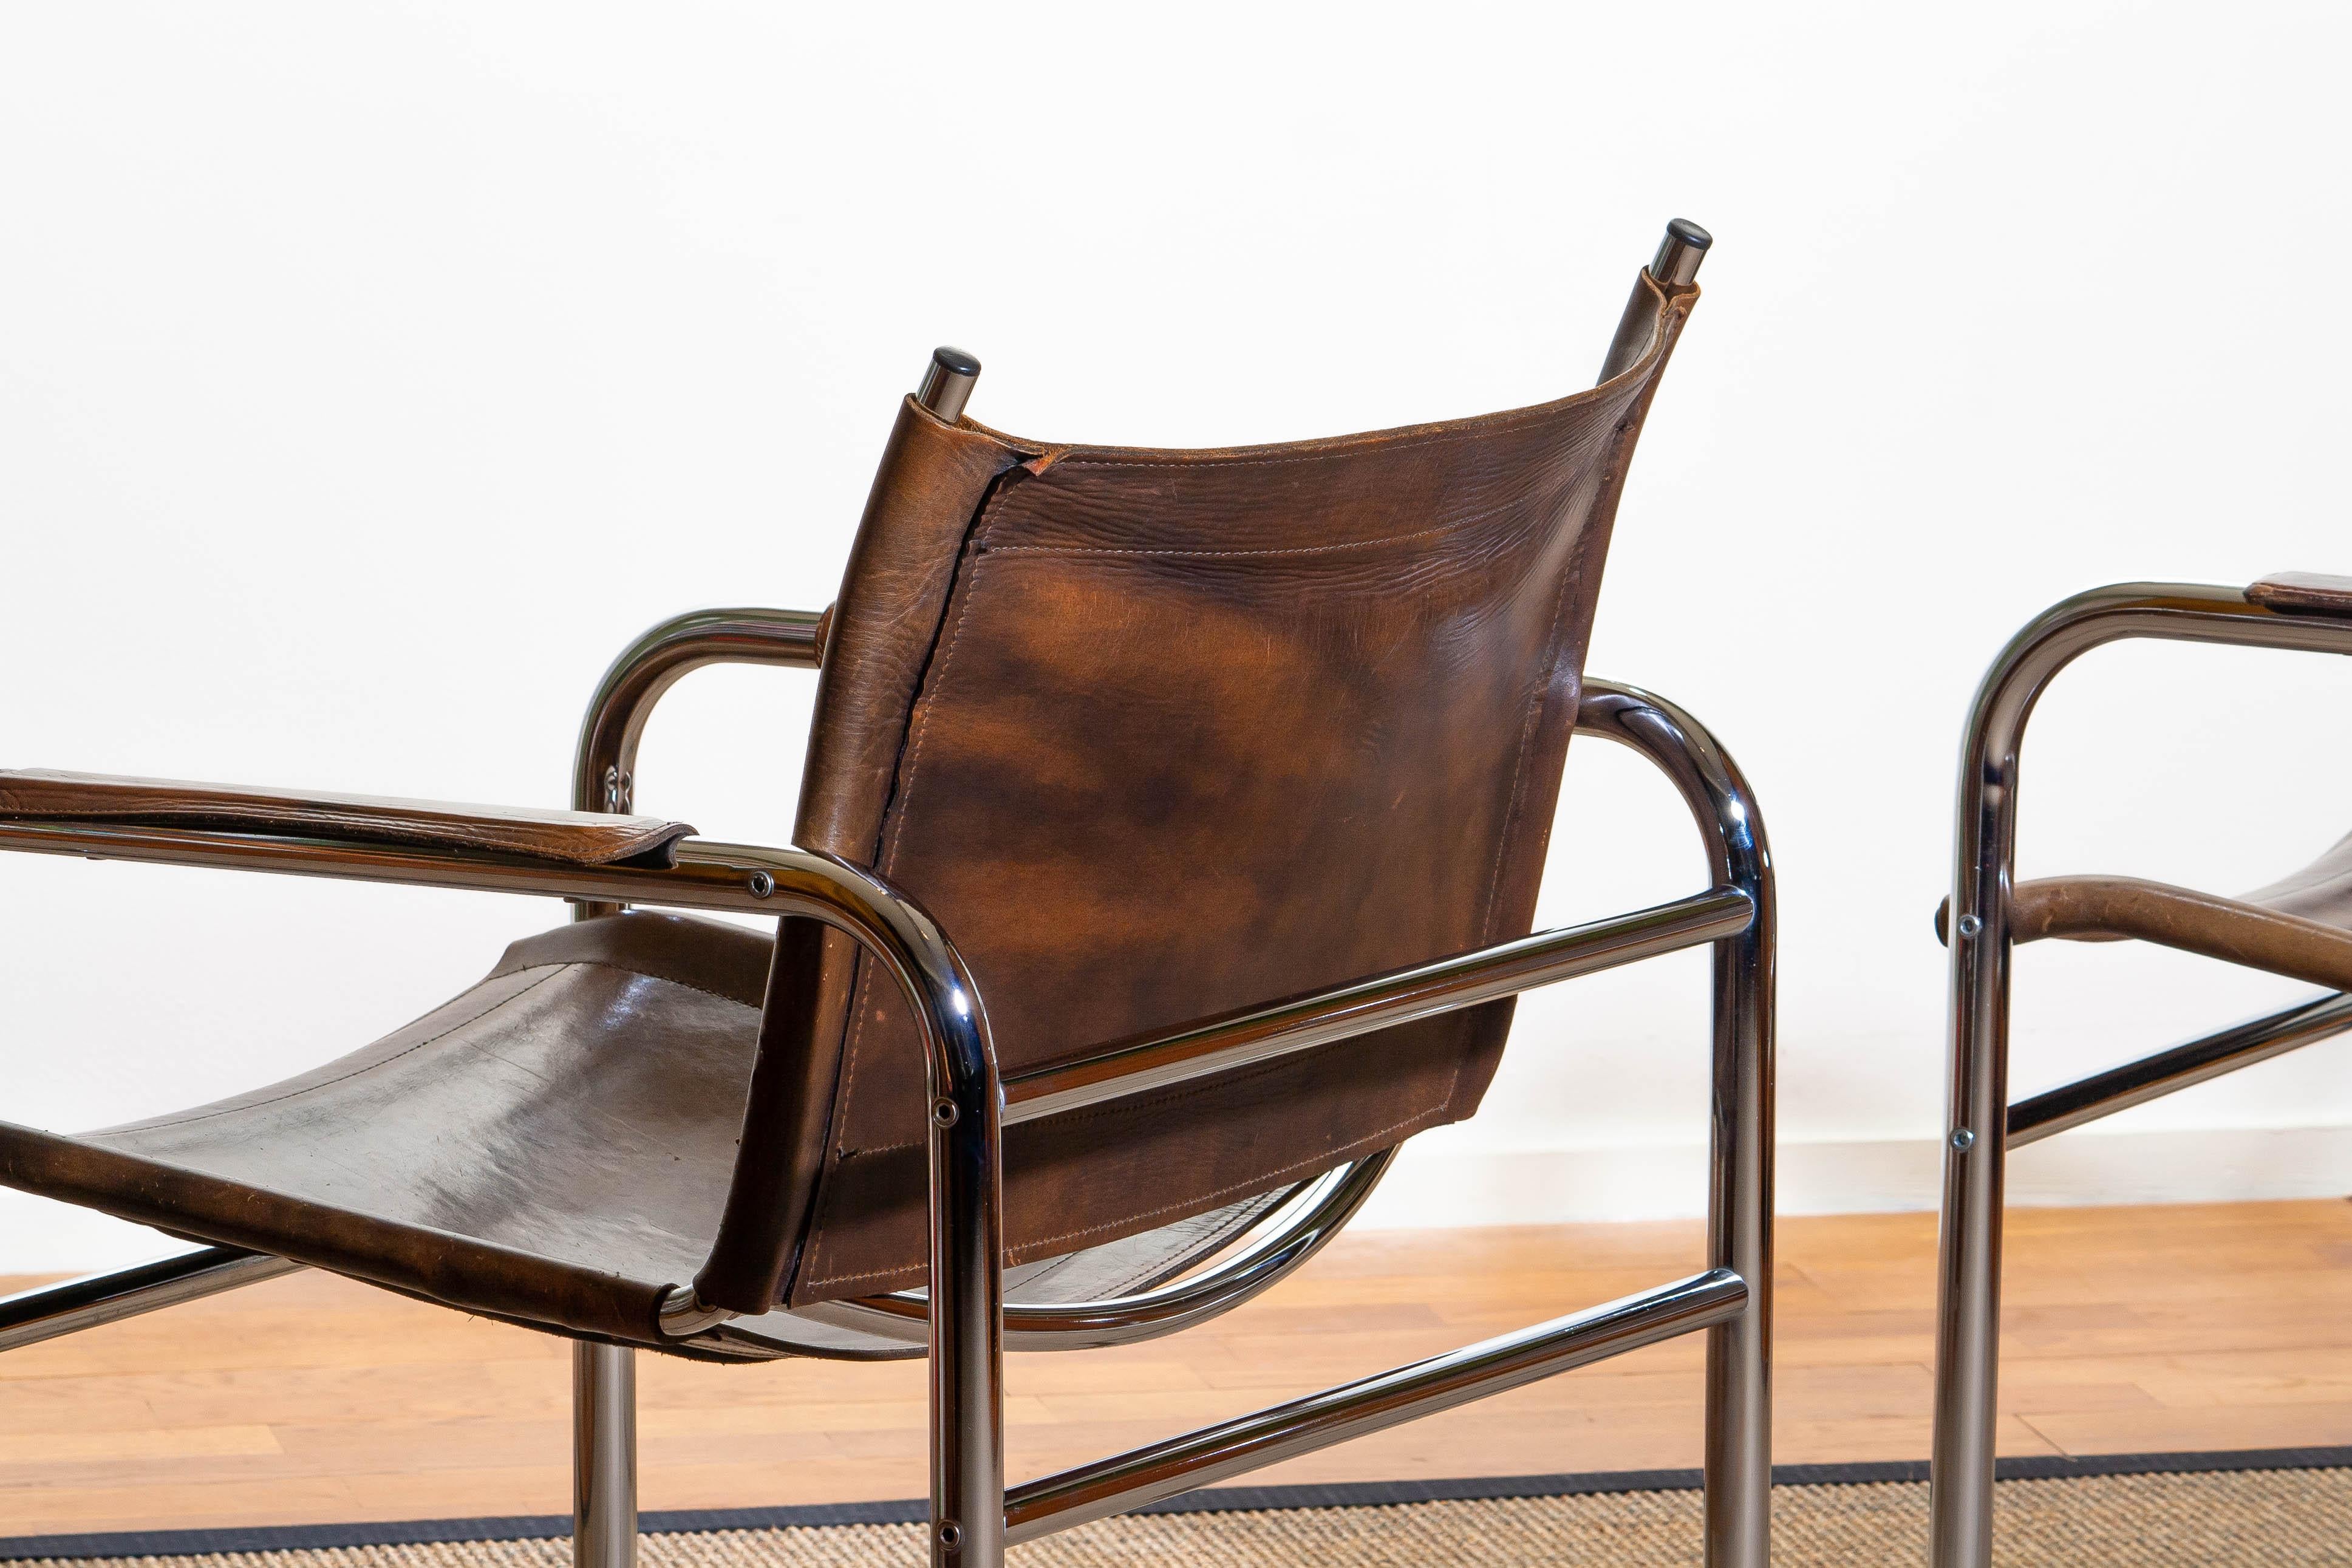 1980s, Pair of Leather and Tubular Steel Armchairs by Tord Bjorklund, Sweden 2